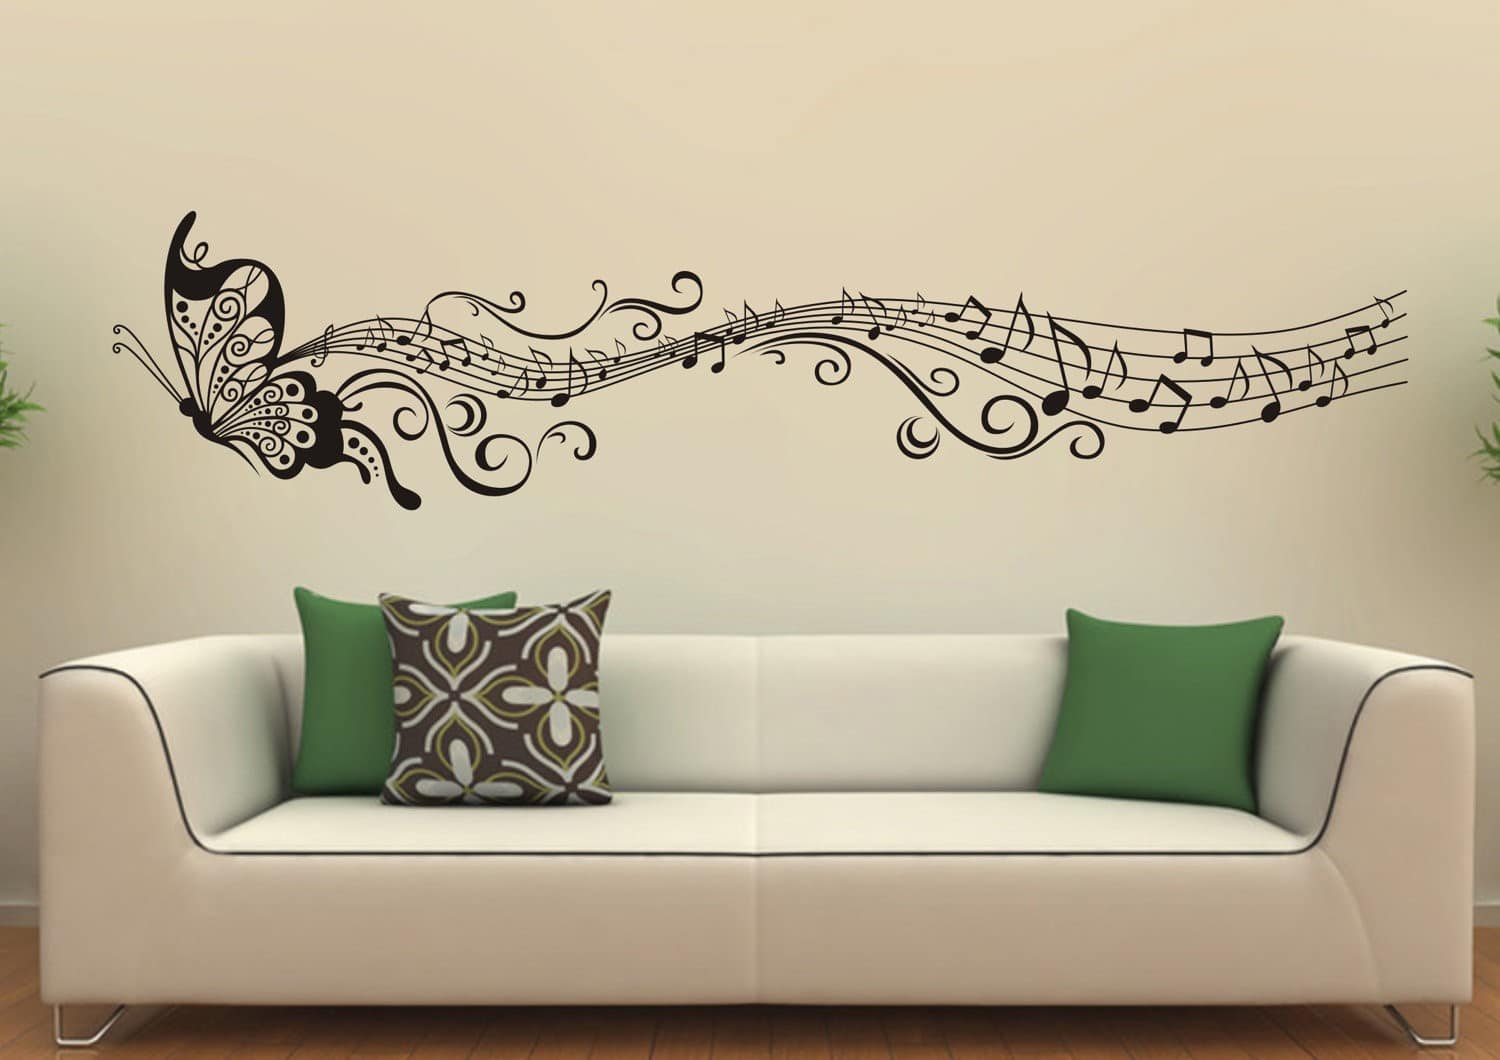 Make Your Home Beautiful with Unique Wall Decor